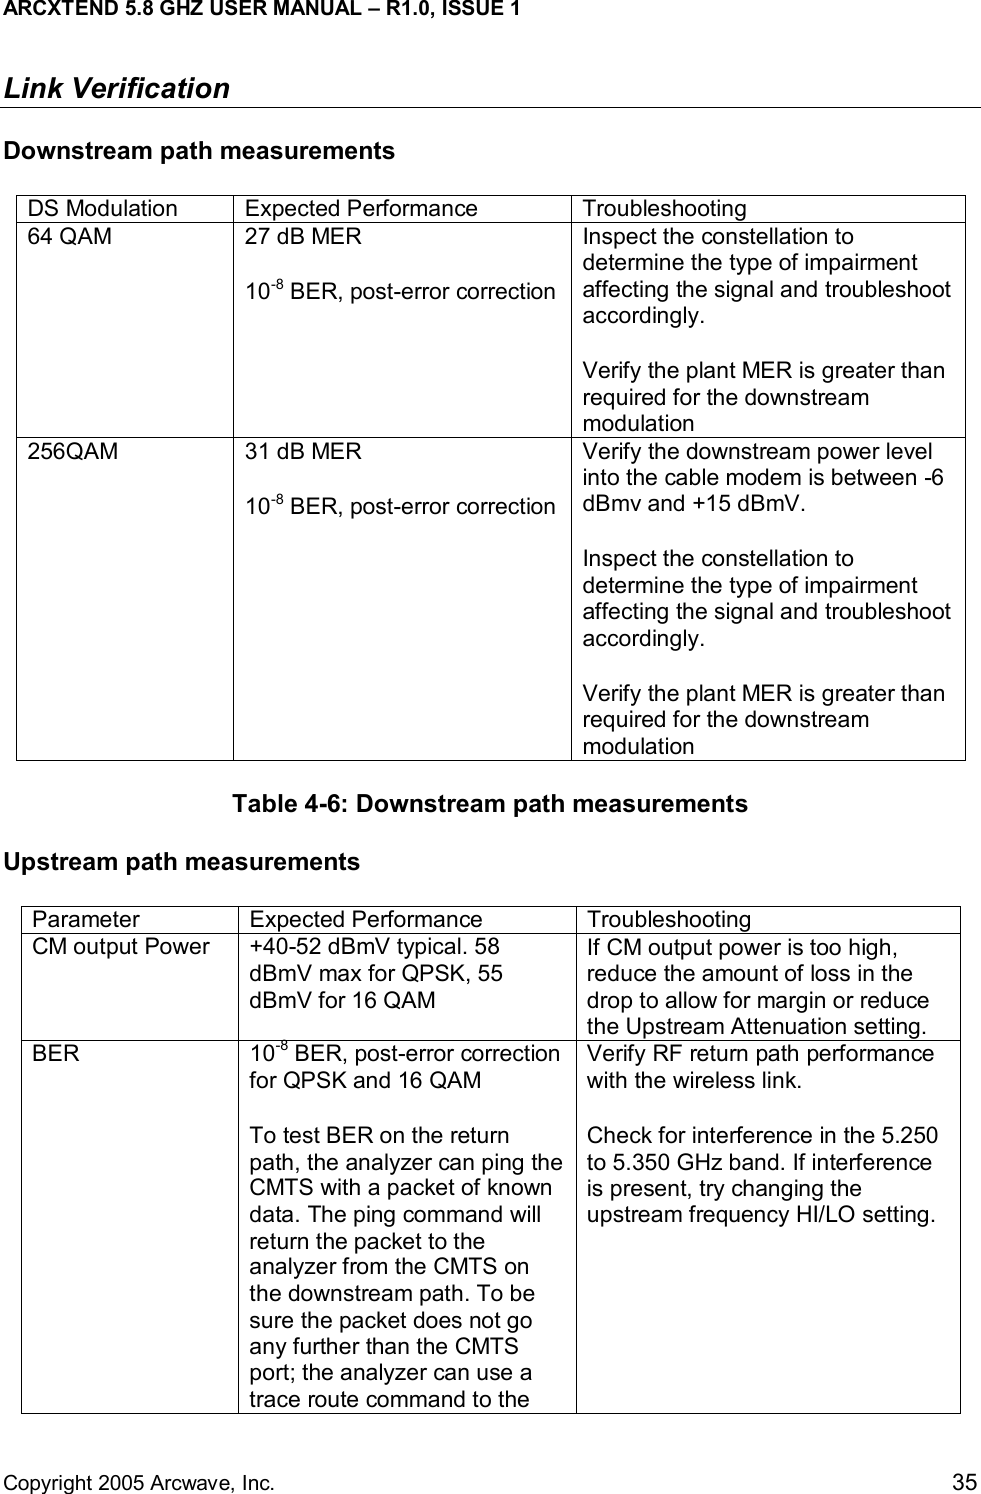 ARCXTEND 5.8 GHZ USER MANUAL – R1.0, ISSUE 1  Copyright 2005 Arcwave, Inc.    35 Link Verification Downstream path measurements DS Modulation  Expected Performance  Troubleshooting 64 QAM   27 dB MER 10-8 BER, post-error correction Inspect the constellation to determine the type of impairment affecting the signal and troubleshoot accordingly. Verify the plant MER is greater than required for the downstream modulation 256QAM   31 dB MER 10-8 BER, post-error correction Verify the downstream power level into the cable modem is between -6 dBmv and +15 dBmV.  Inspect the constellation to determine the type of impairment affecting the signal and troubleshoot accordingly. Verify the plant MER is greater than required for the downstream modulation Table 4-6: Downstream path measurements Upstream path measurements Parameter Expected Performance Troubleshooting CM output Power  +40-52 dBmV typical. 58 dBmV max for QPSK, 55 dBmV for 16 QAM If CM output power is too high, reduce the amount of loss in the drop to allow for margin or reduce the Upstream Attenuation setting. BER 10-8 BER, post-error correction for QPSK and 16 QAM To test BER on the return path, the analyzer can ping the CMTS with a packet of known data. The ping command will return the packet to the analyzer from the CMTS on the downstream path. To be sure the packet does not go any further than the CMTS port; the analyzer can use a trace route command to the Verify RF return path performance with the wireless link.  Check for interference in the 5.250 to 5.350 GHz band. If interference is present, try changing the upstream frequency HI/LO setting.  